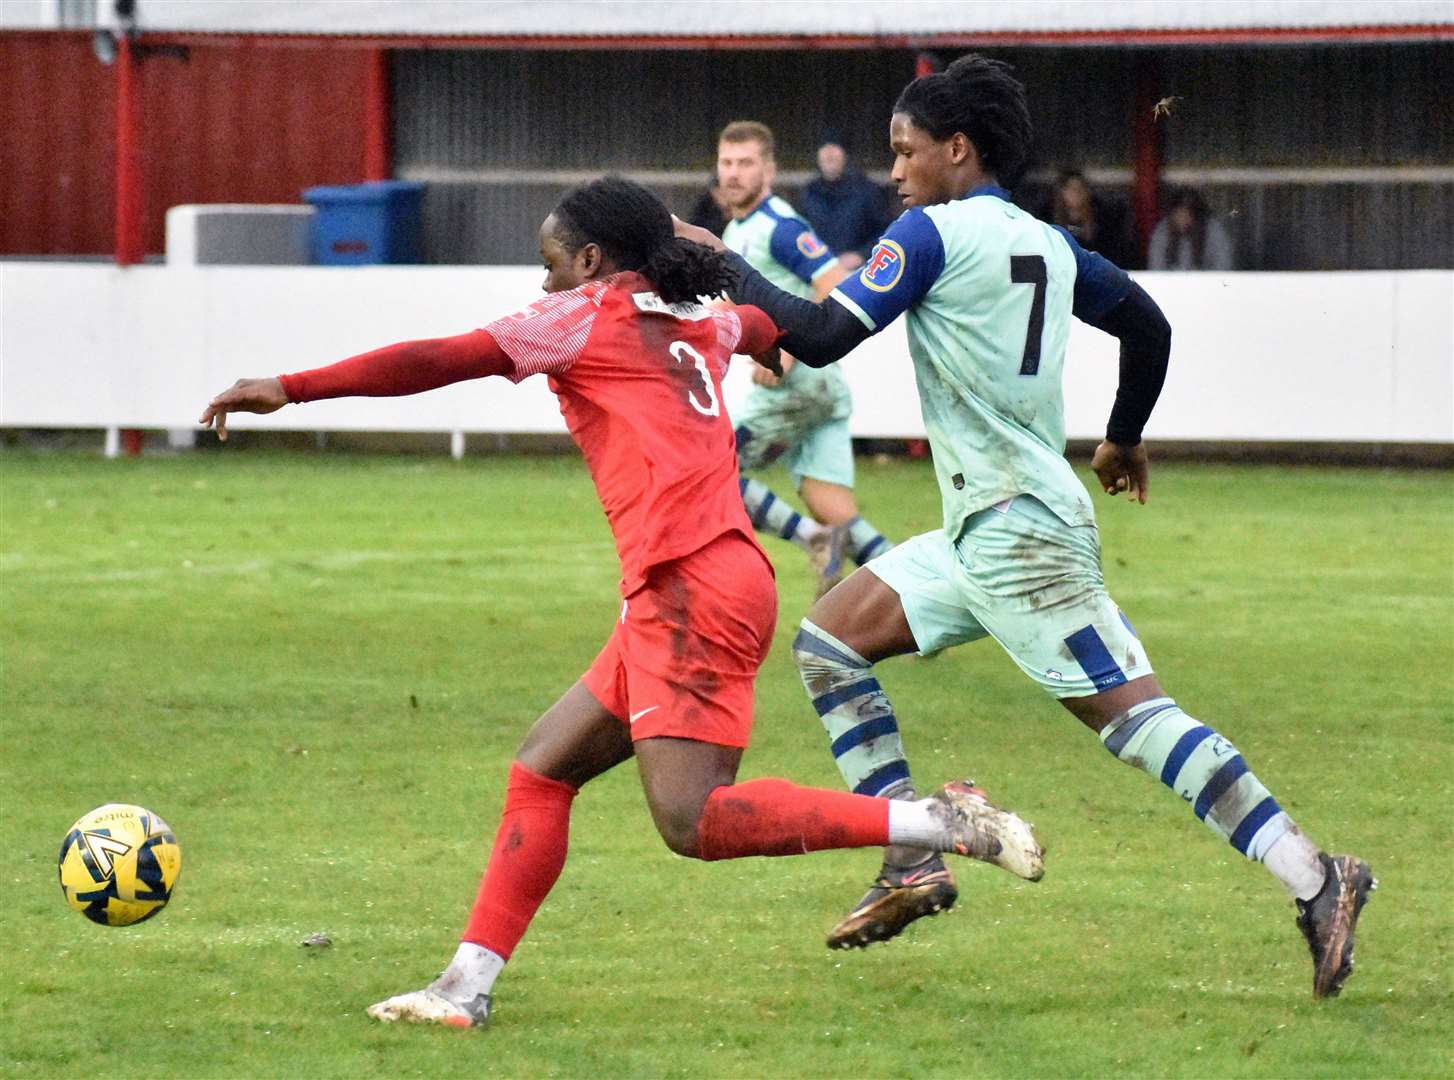 Francis Mampolo, right, on the attack for Tonbridge Angels during their FA Trophy tie at Hythe last weekend. Picture: Randolph File